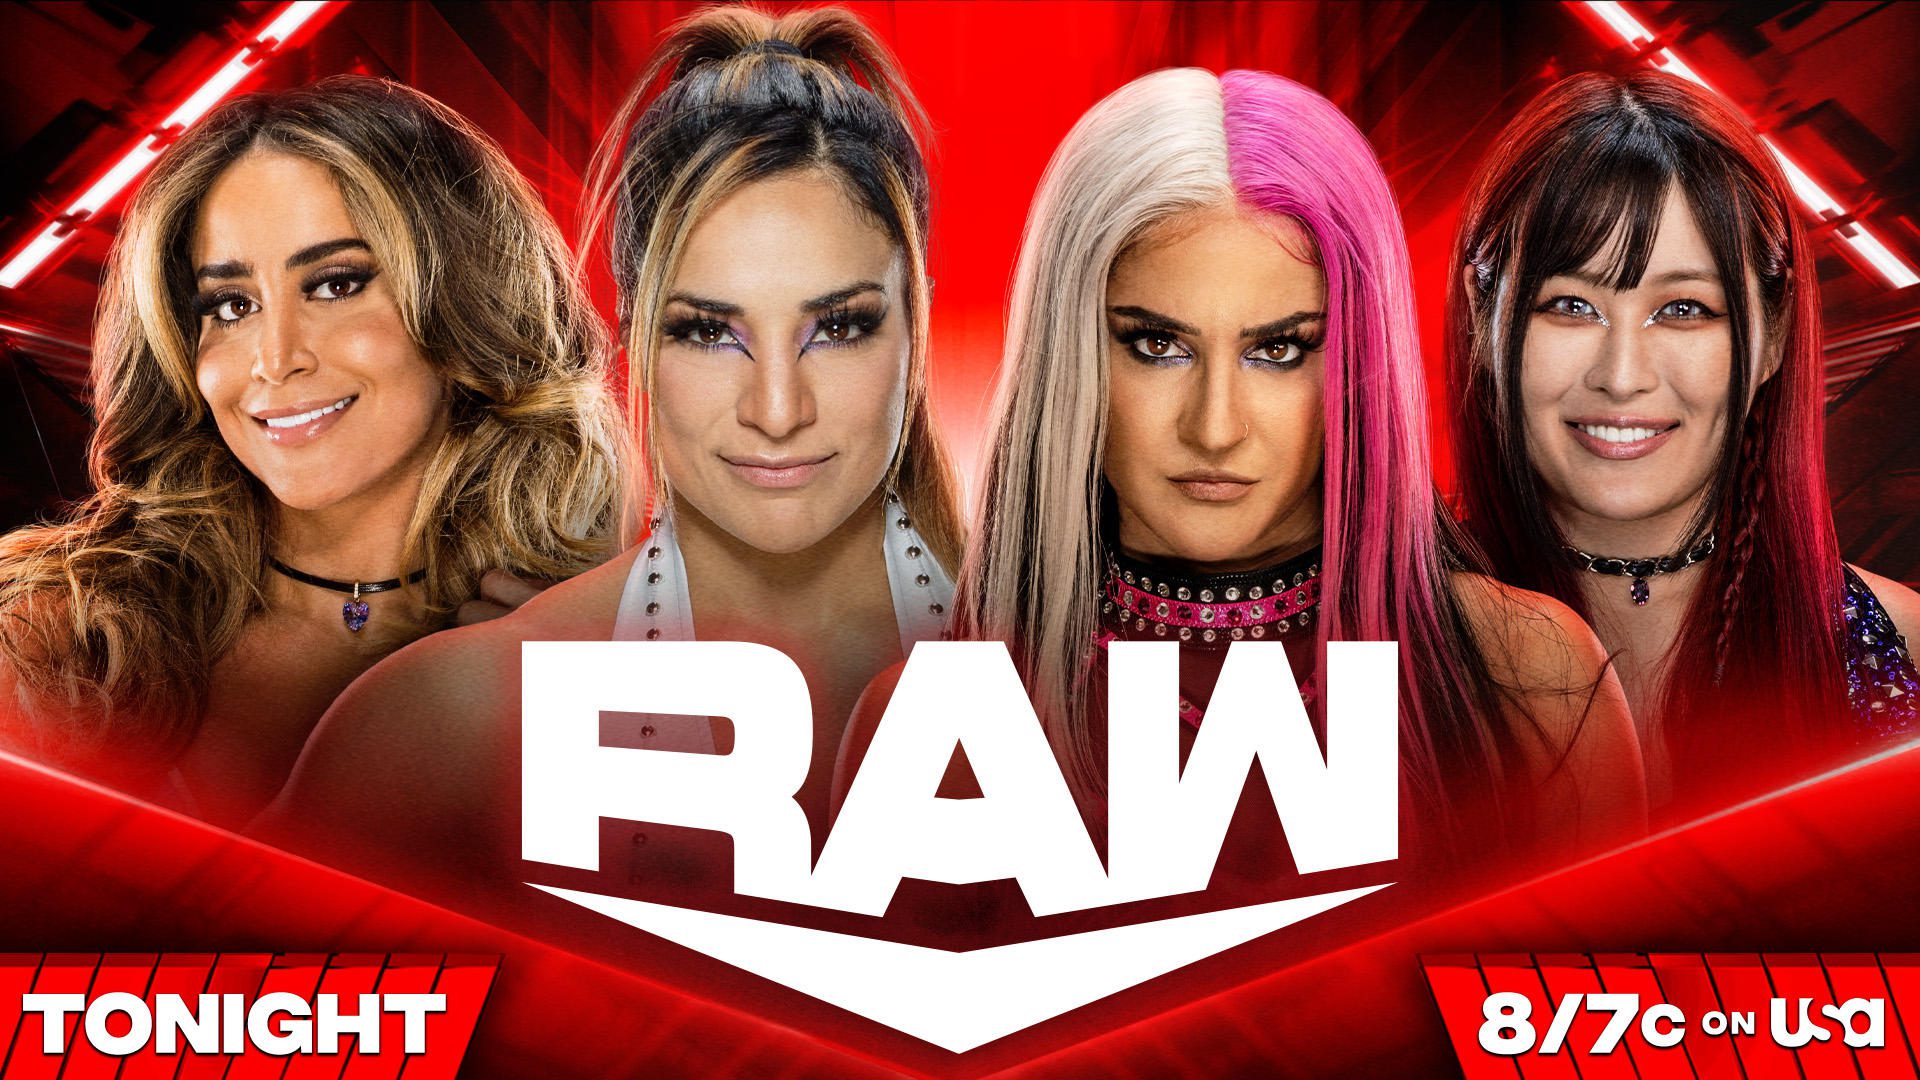 WWE Raw 29 August Preview